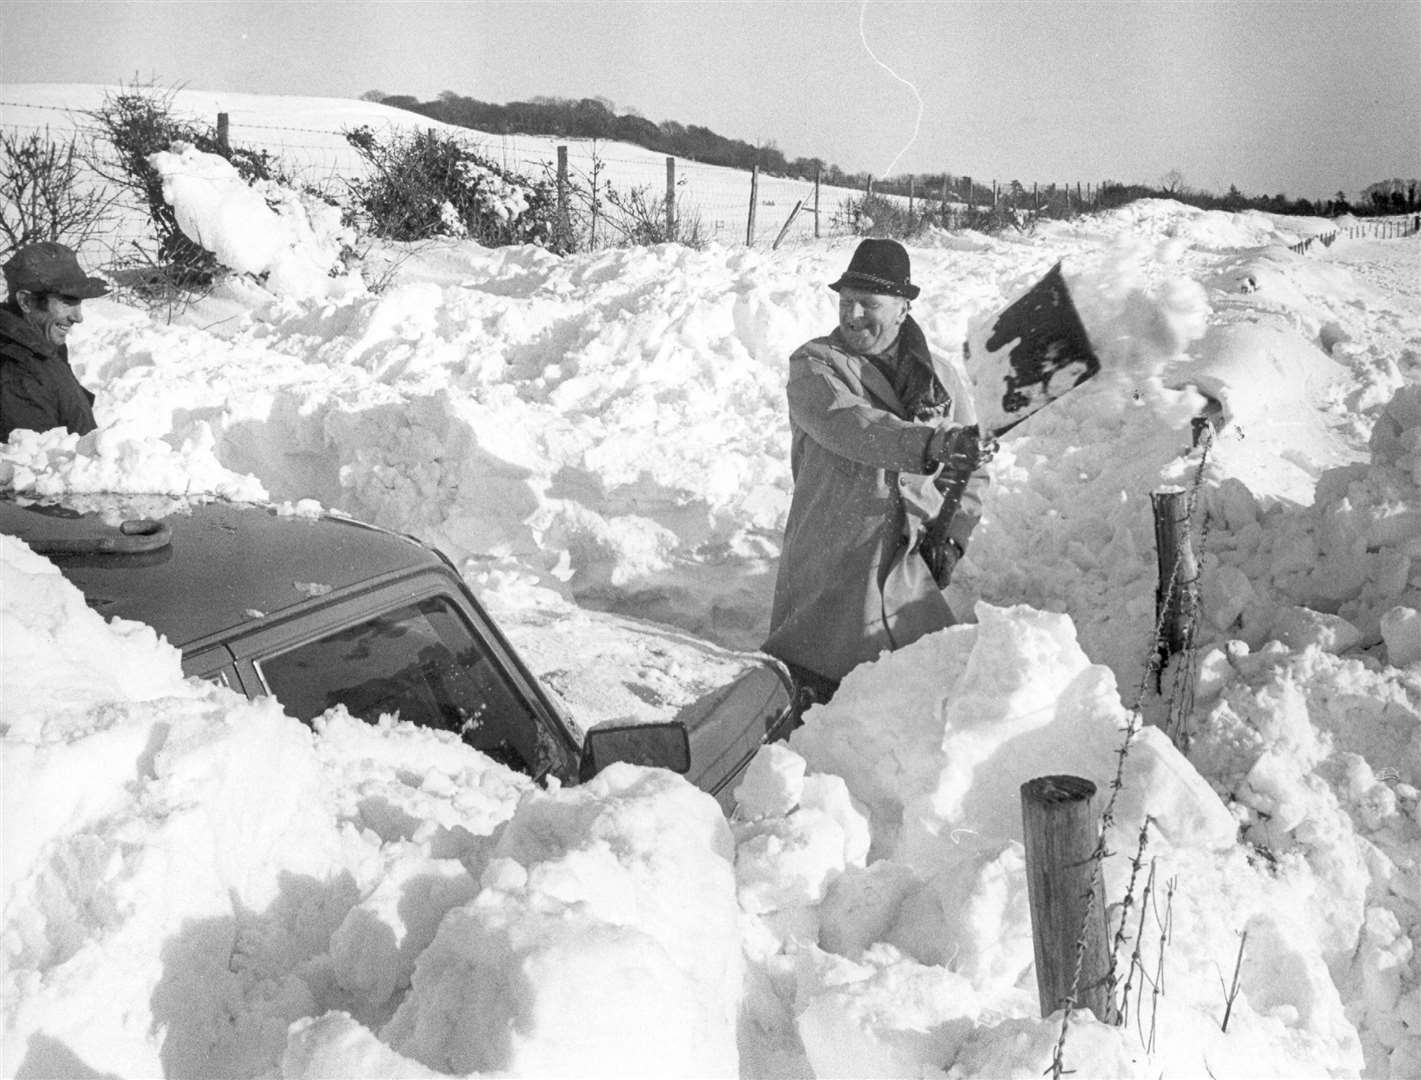 A car trapped in heavy snowfall in Kent in 1979